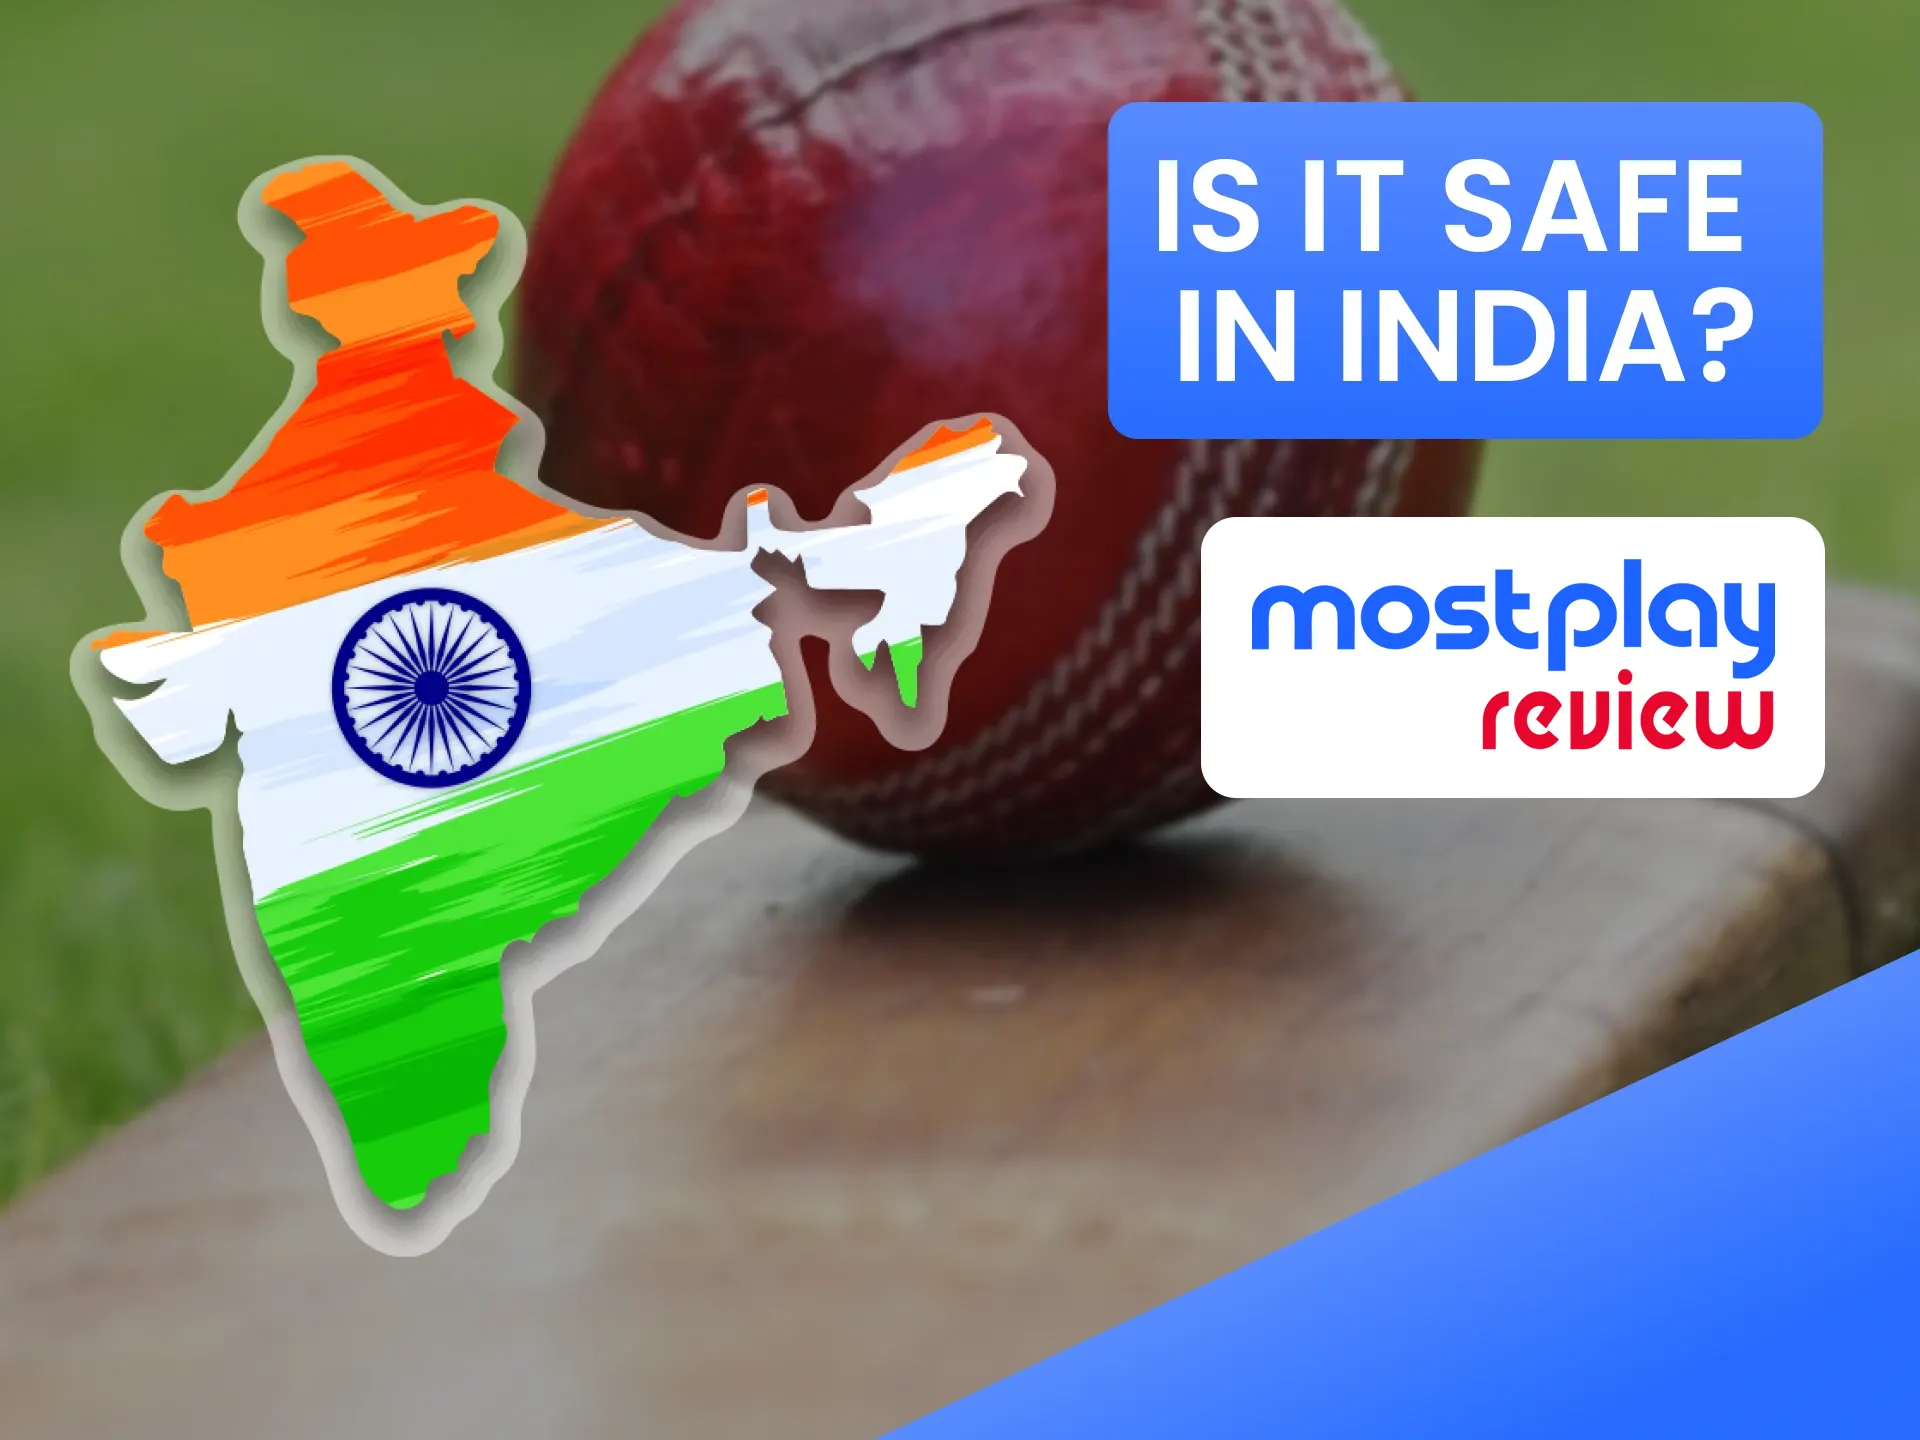 We will tell you how safe Mostplay is in India.